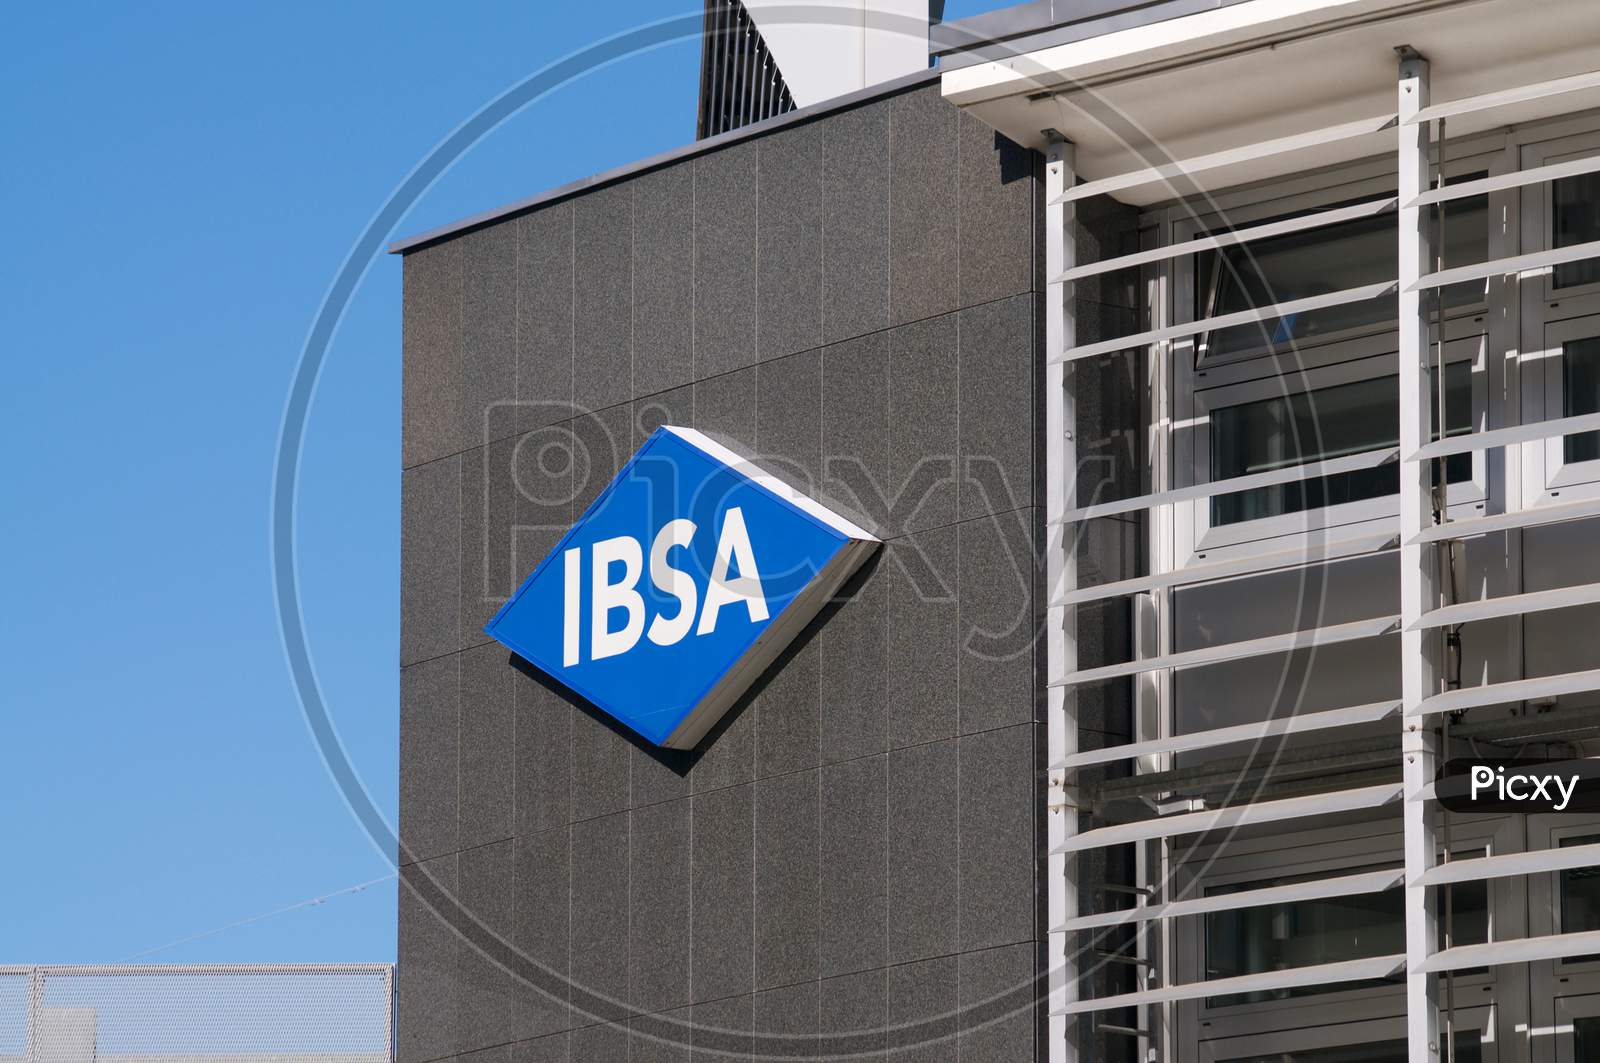 Ibsa Group Logo Sign Hanging On A Building In Switzerland